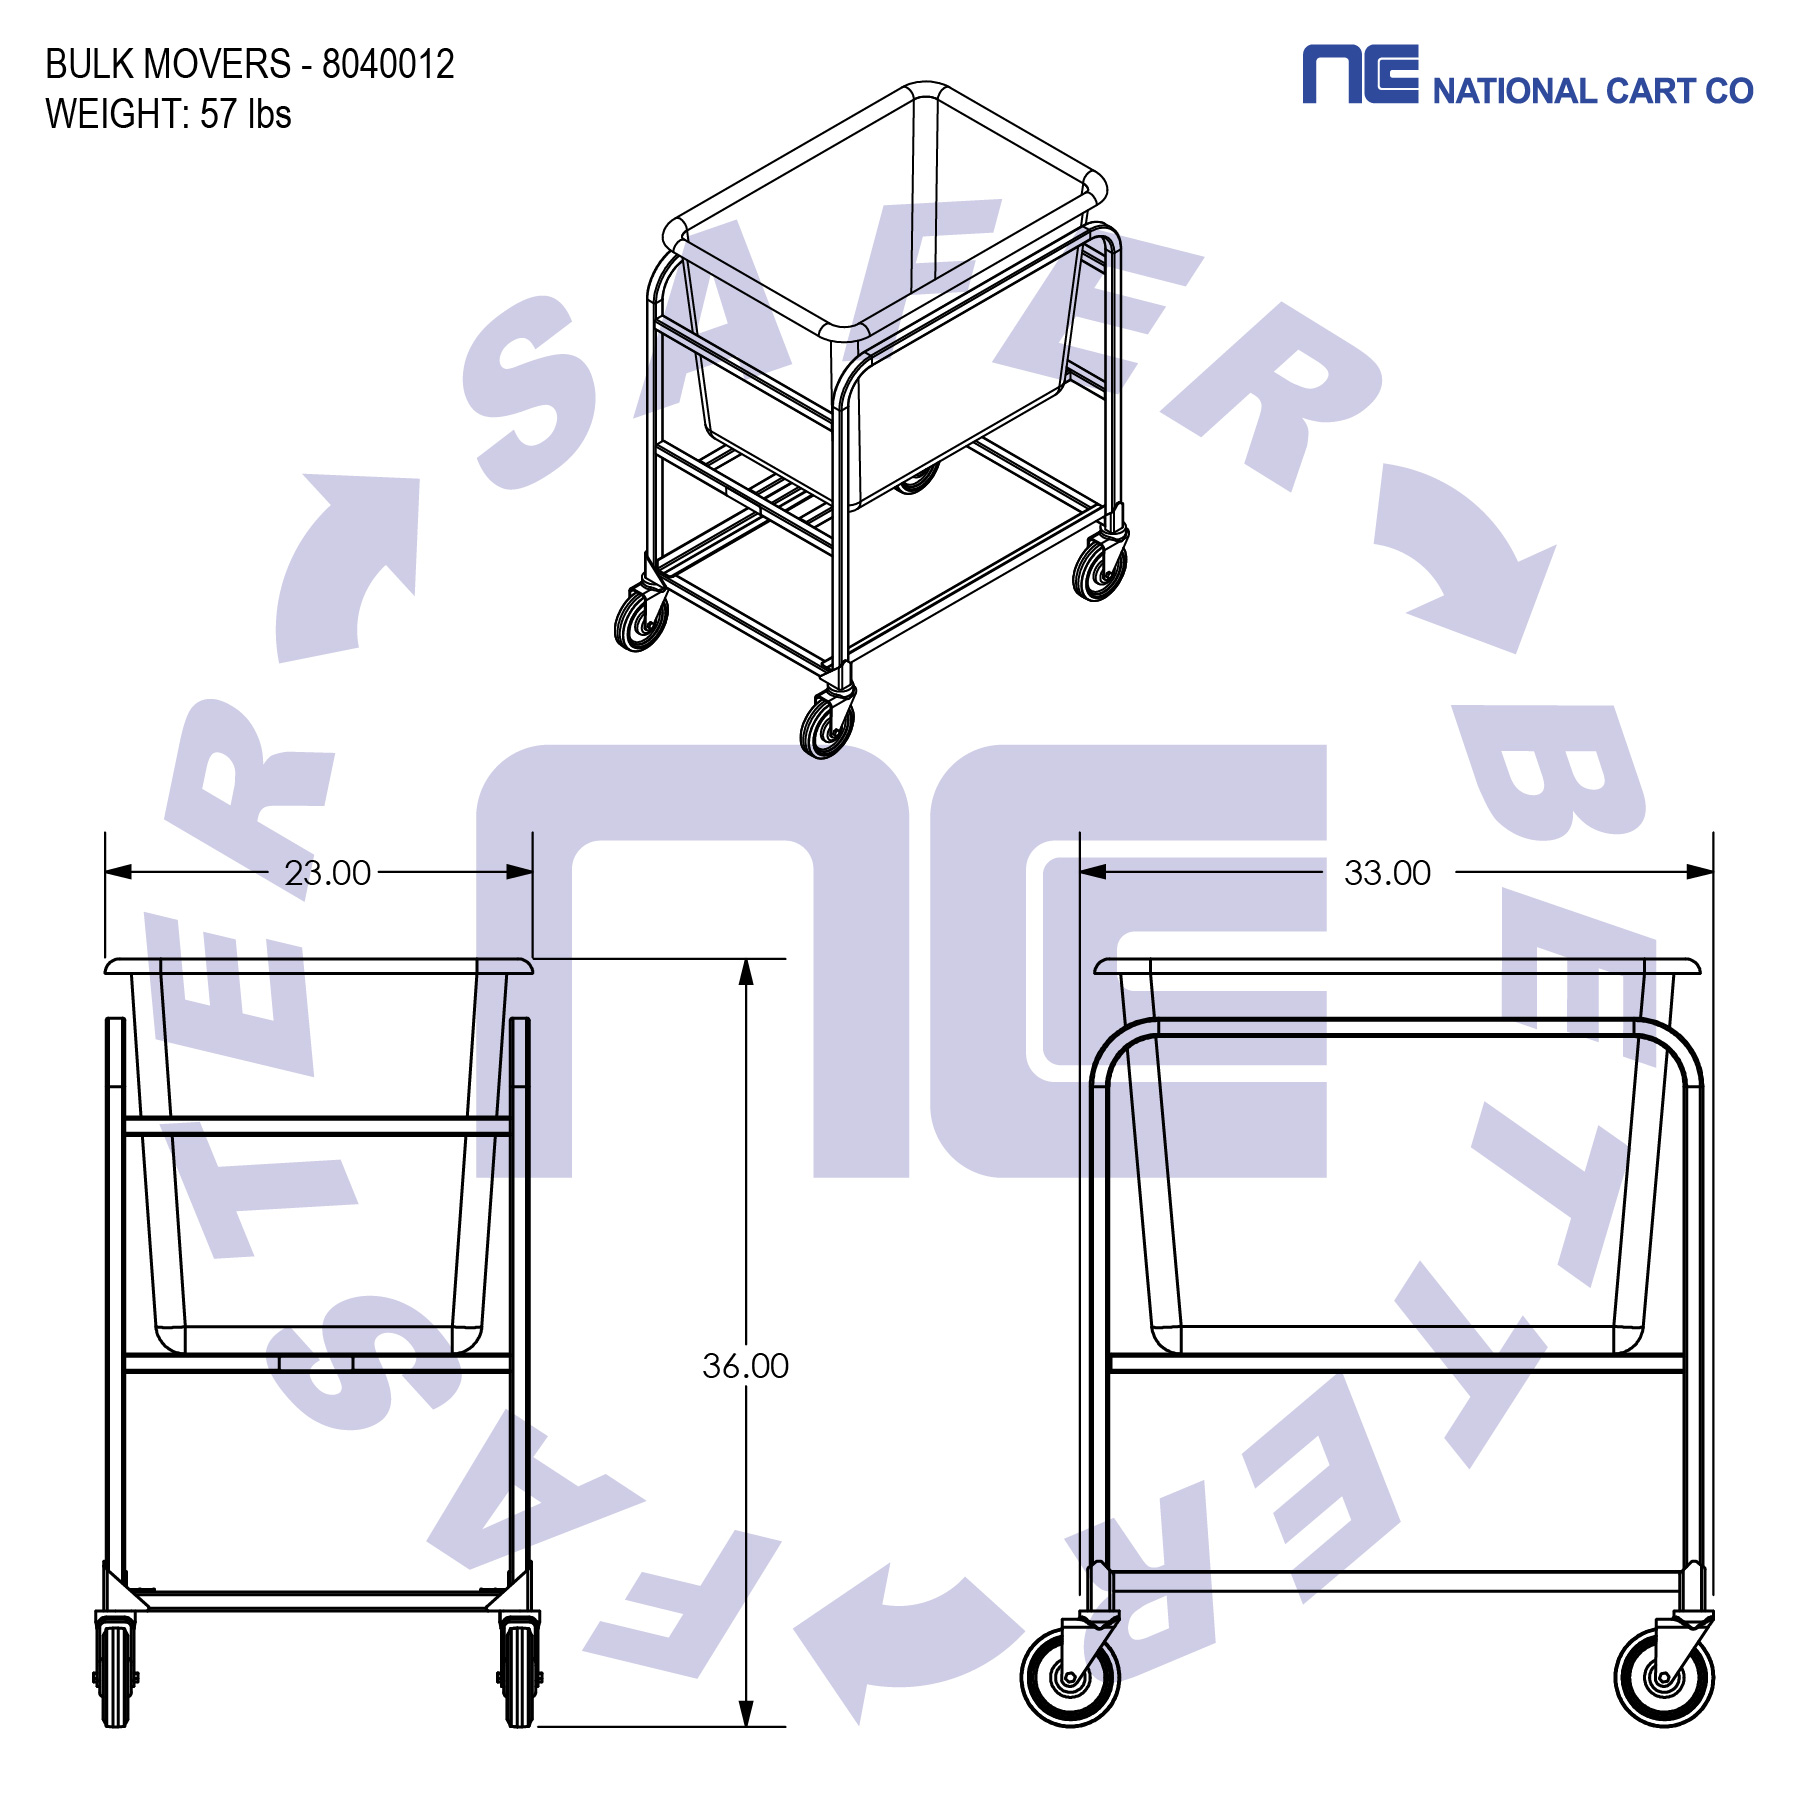 nest dollies industrial cart nesting picking cart NSF cart NSF rack NSF approved NSF certified National Sanitation Foundation tray shelf Distribution Cart picking cart tray shelf picking cart, picking cart, ecom cart, ecommerce cart, ecommerce picking cart, picking cart, INDUSTRIAL CARTS, grocery cart grocery picking cart, department store cart, beverage cart NSF approved. This food service cart meets strict standards and procedures imposed by NSF.